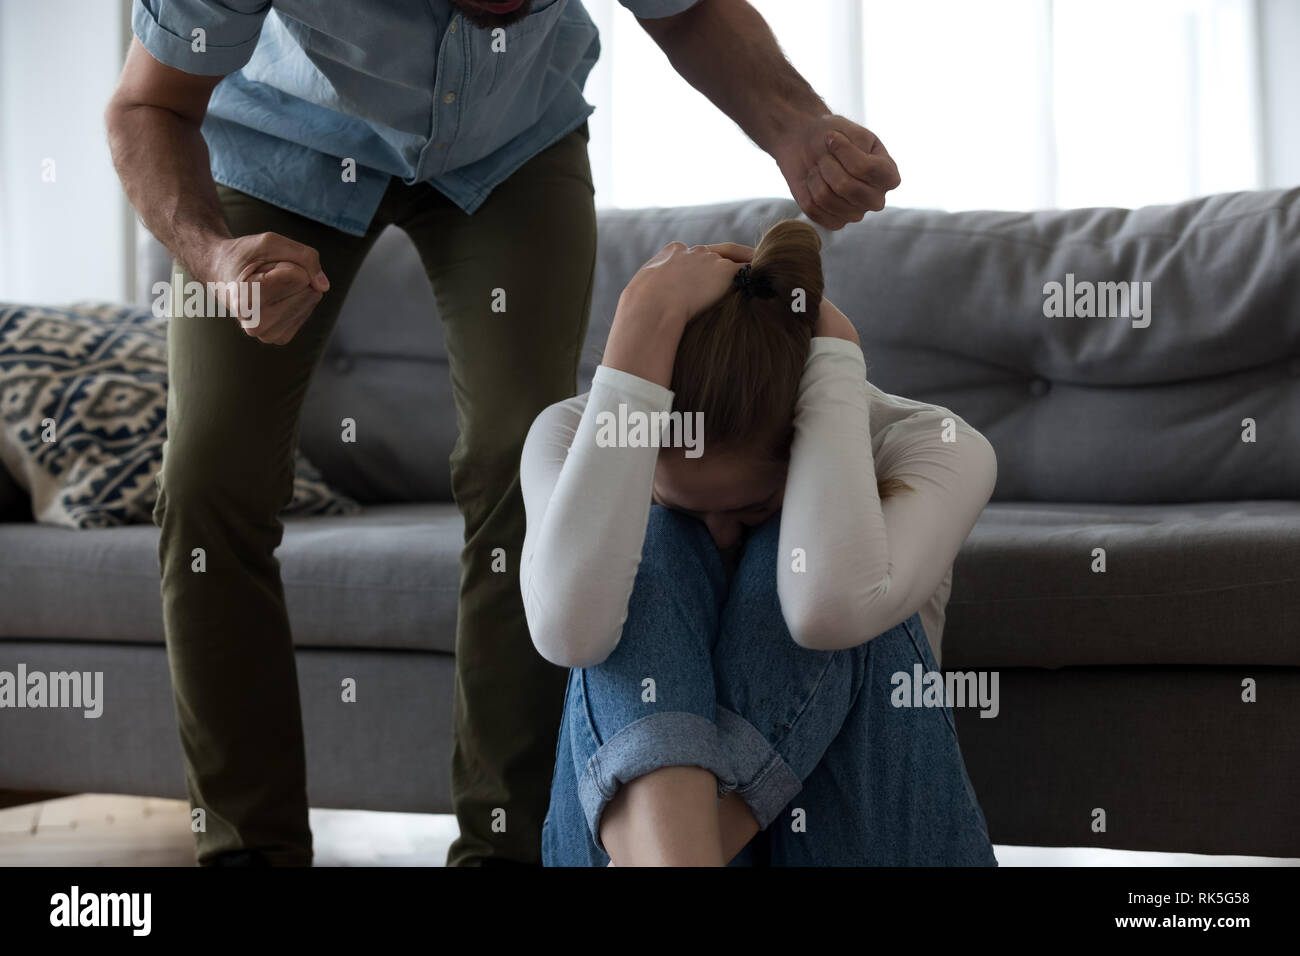 Abusive husband threaten crying wife, fear of domestic violence concept Stock Photo